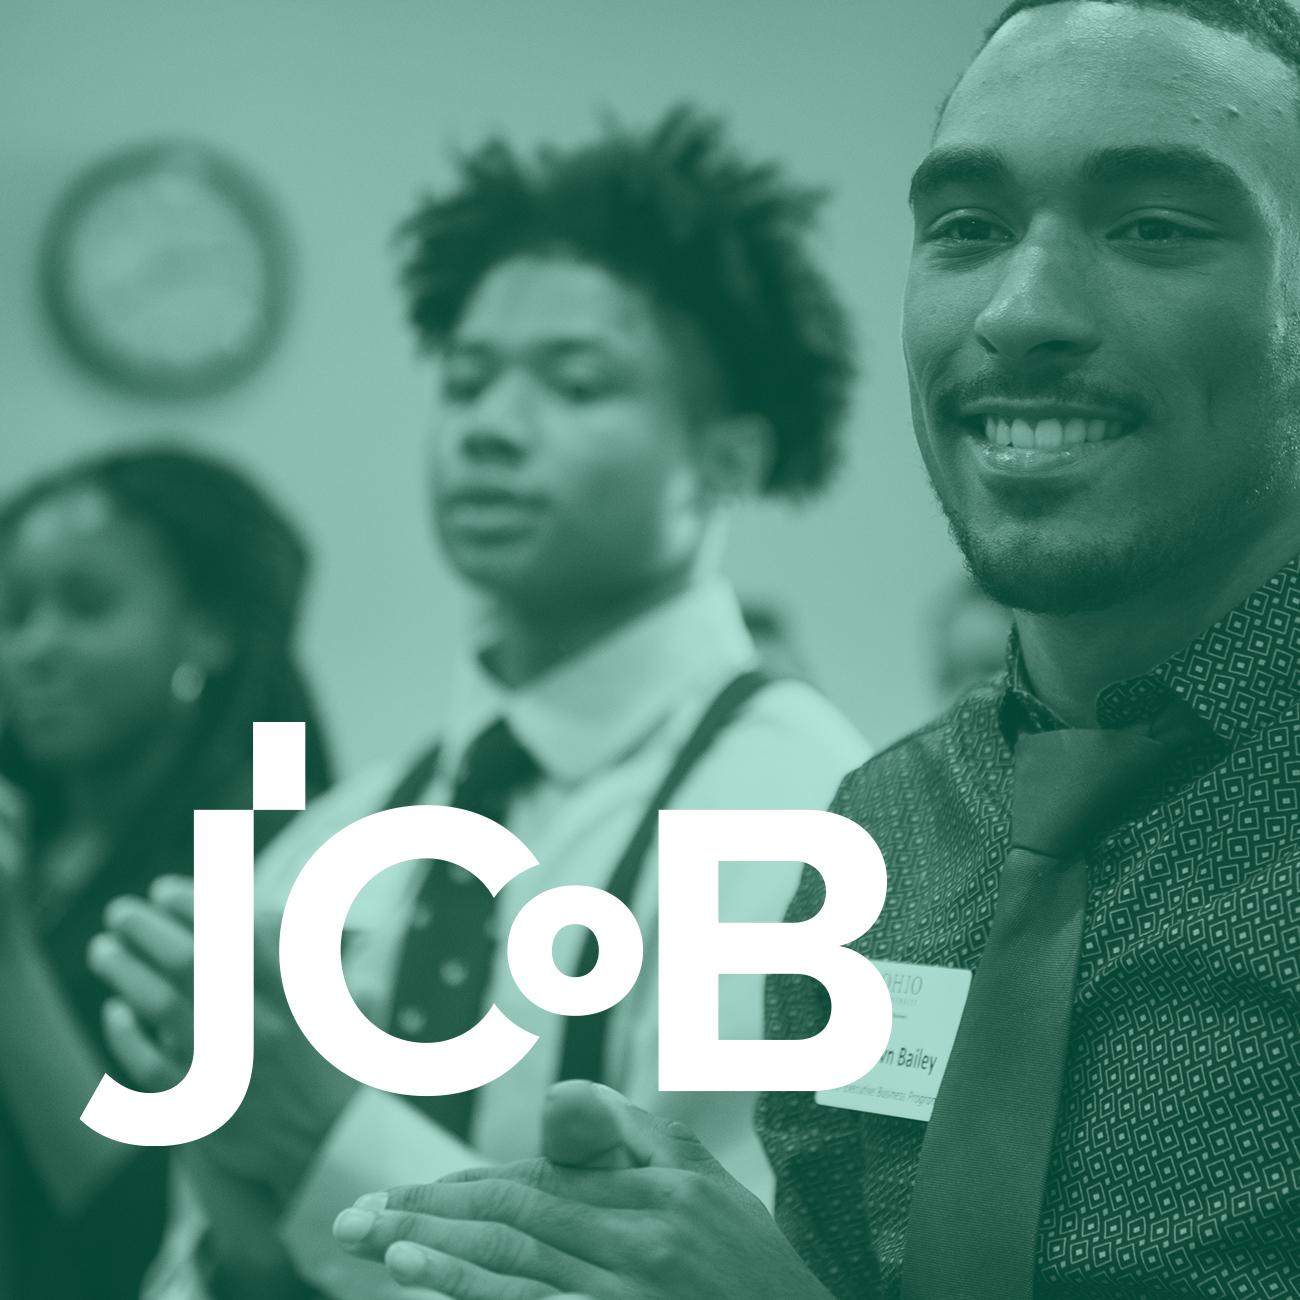 JCob text logo over background image of three students